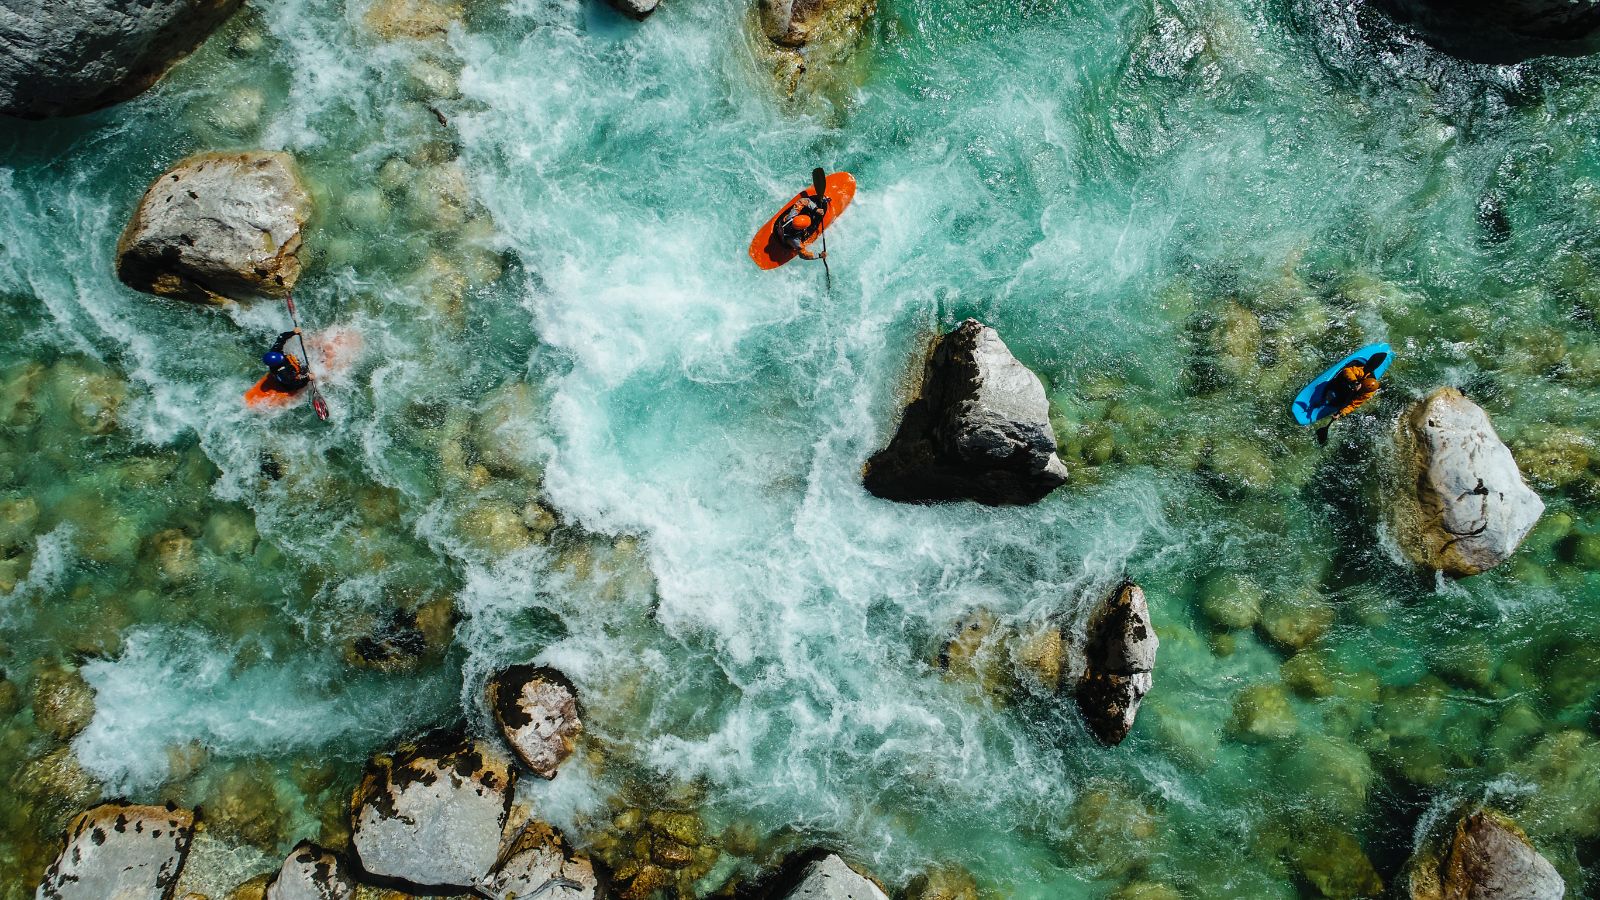 Whitewater kayaking along the Soca River in Slovenia